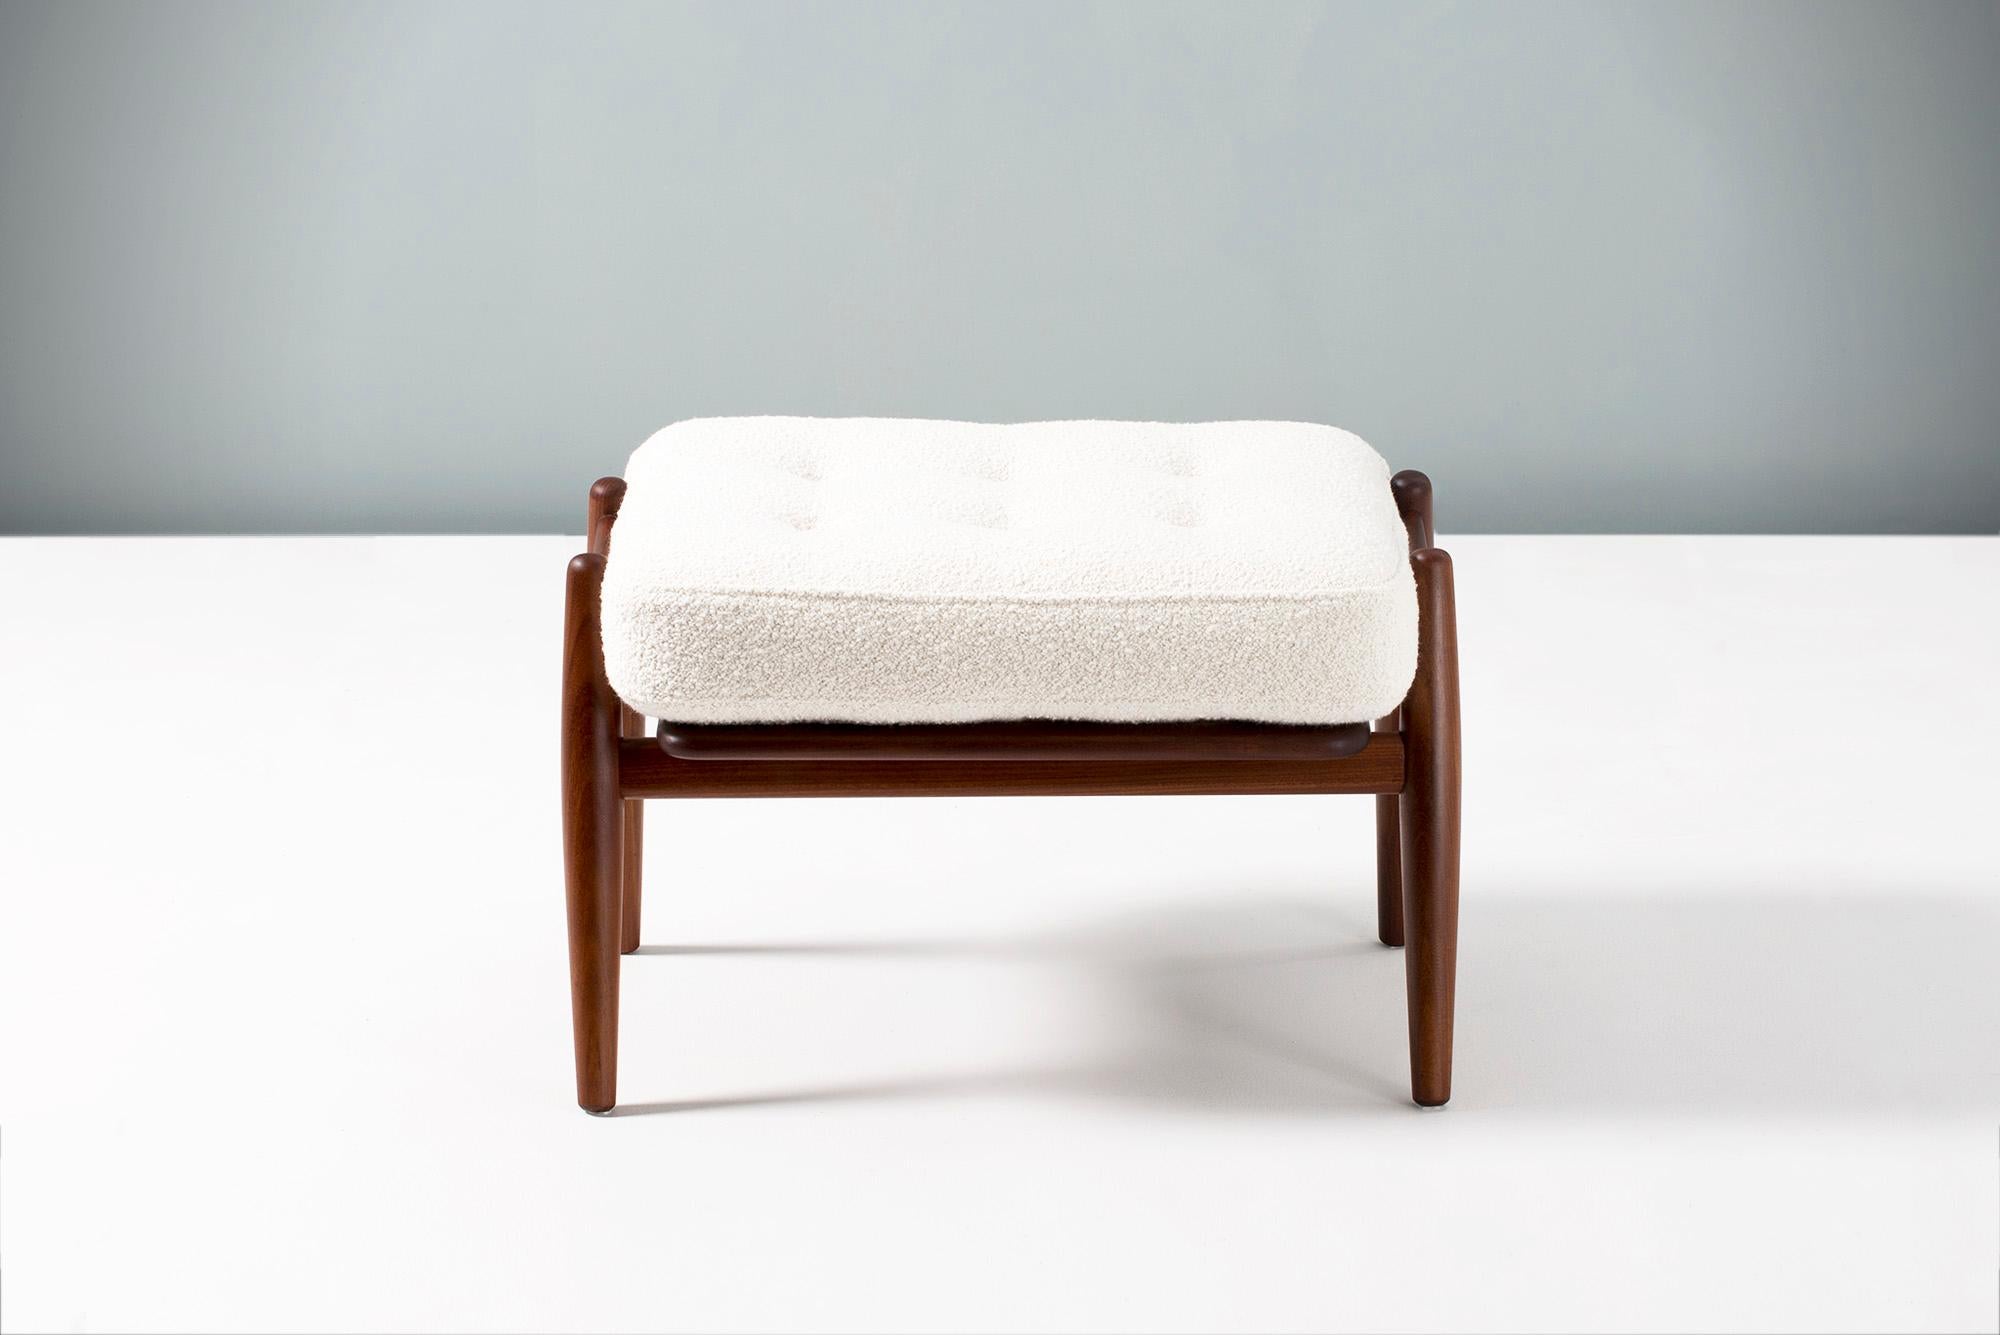 Hans J. Wegner

GE-240 'Cigar' Ottoman, circa 1950s.

Rarely seen ottoman produced by GETAMA in Gedsted, Denmark in the late 1950s. This ottoman was designed to complement the GE-240 and GE-260 lounge chairs. The original sprung cushion has been